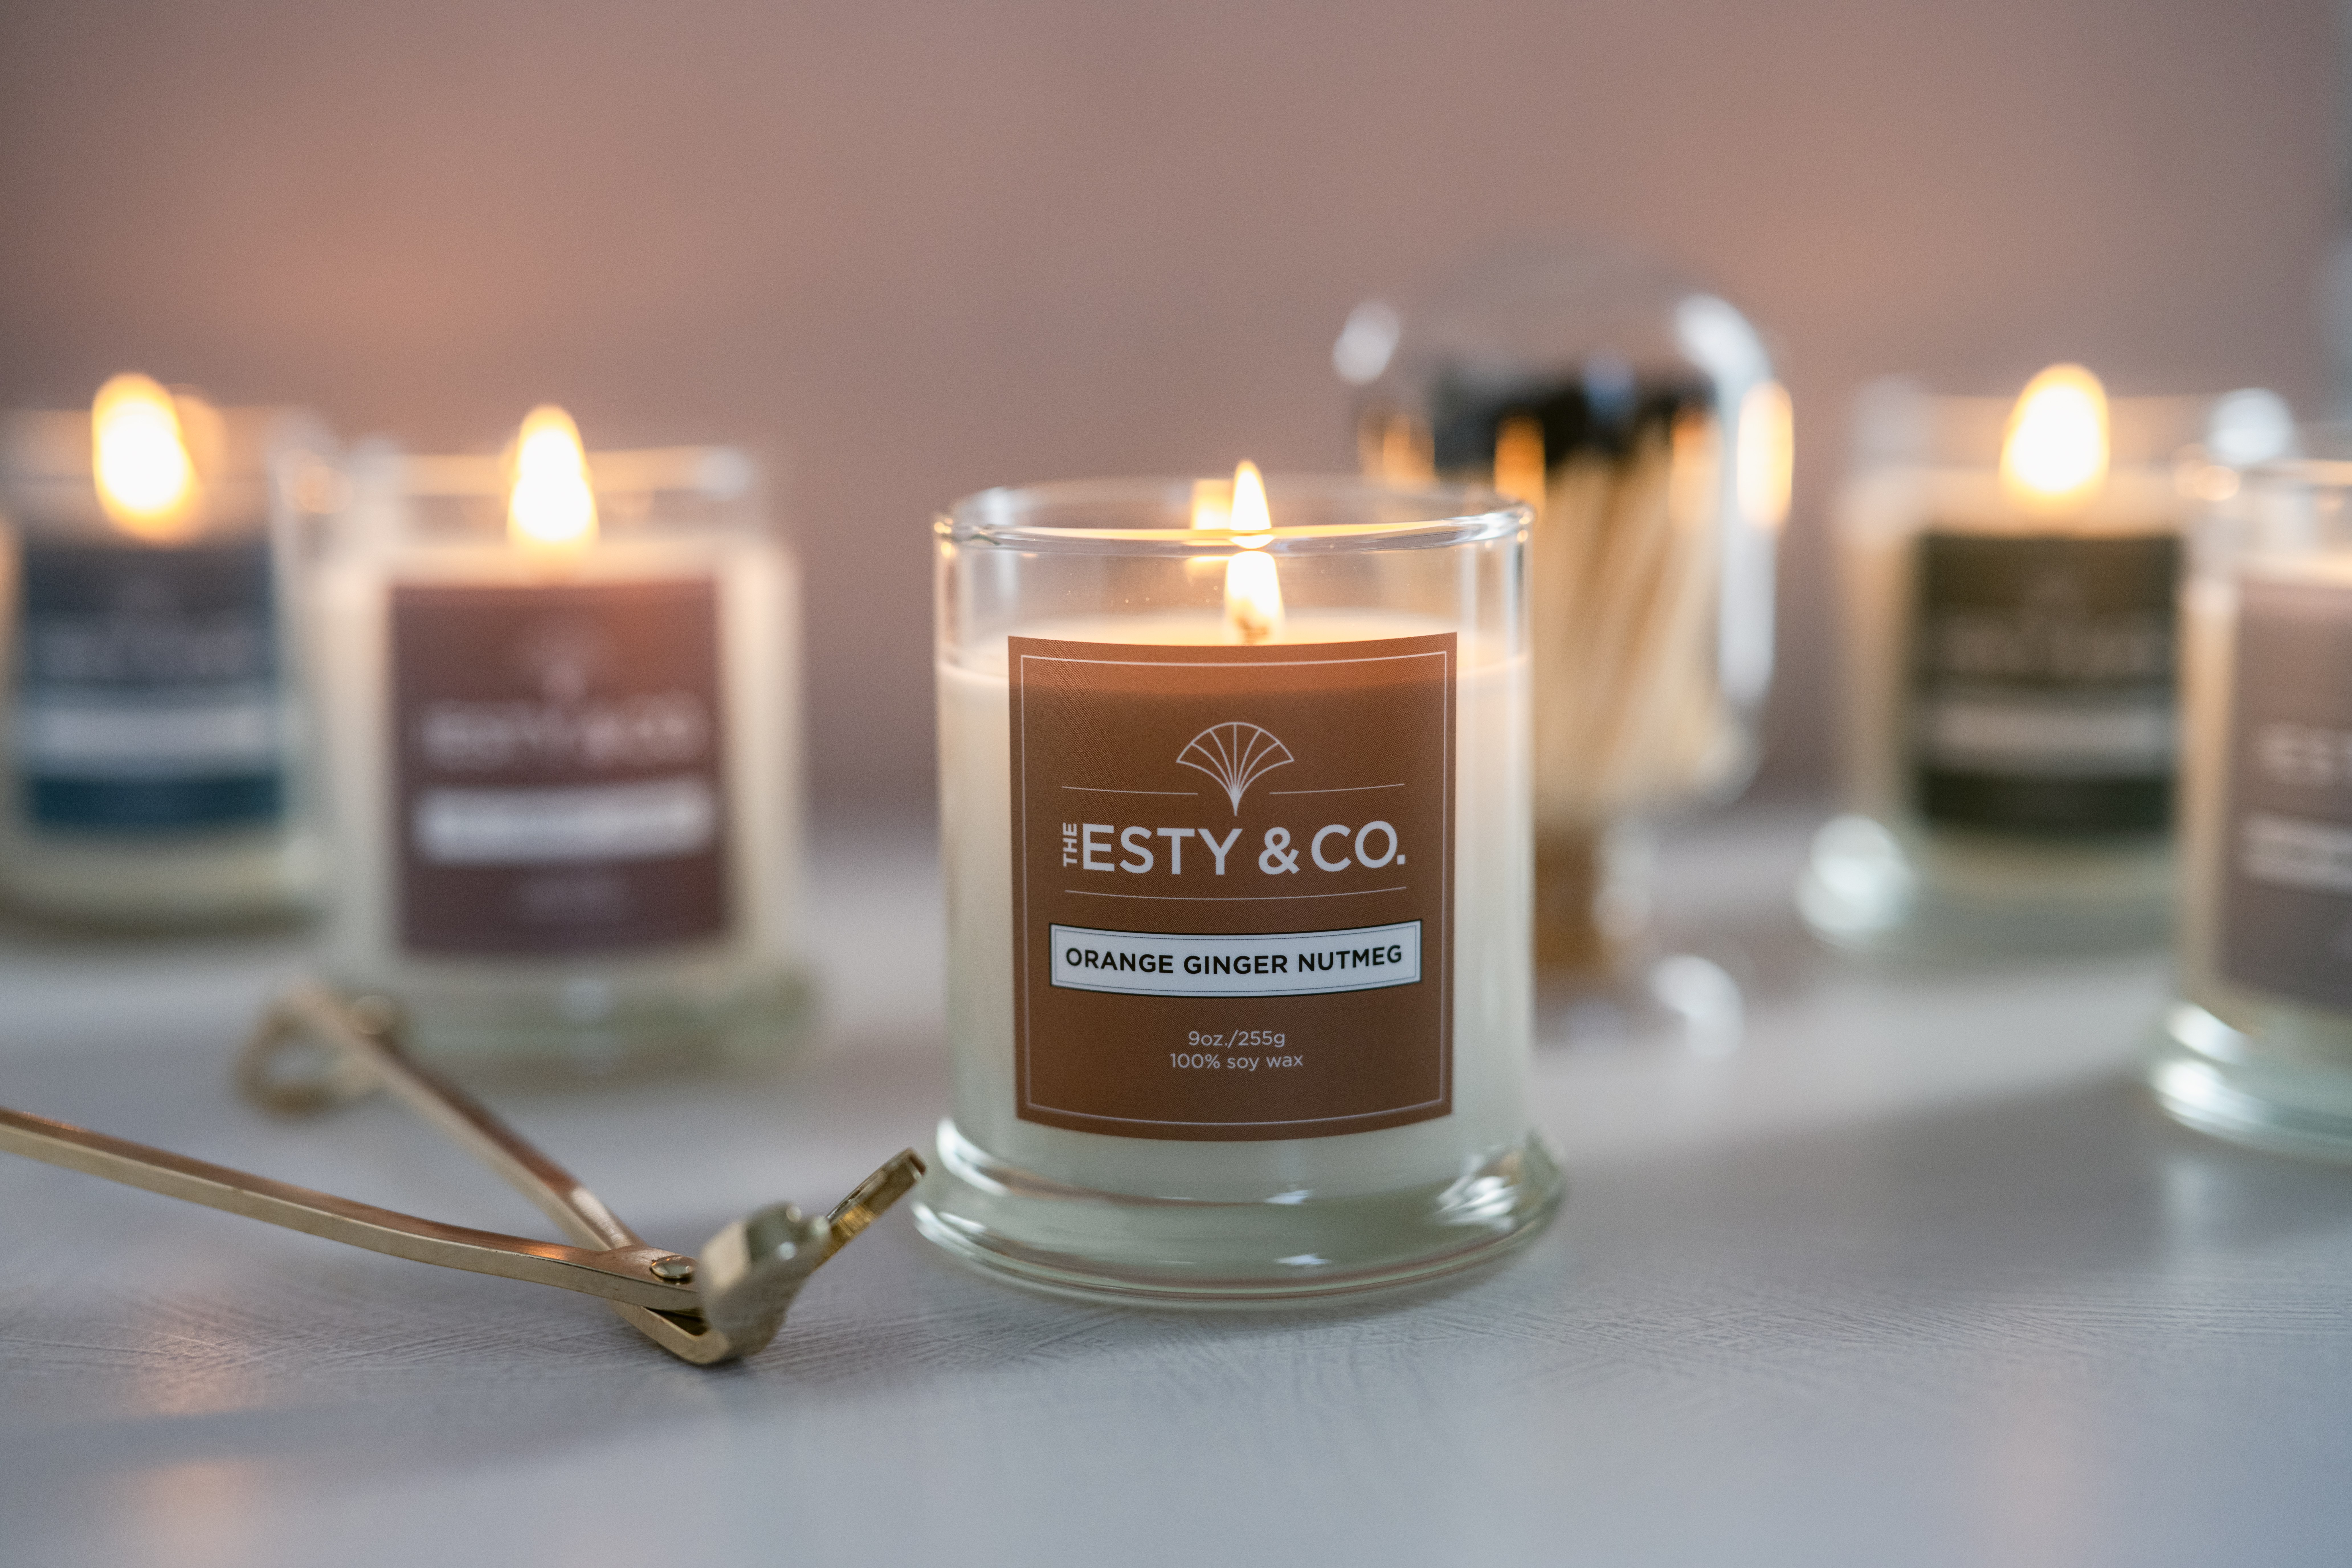 Esty & Co Fall candle line